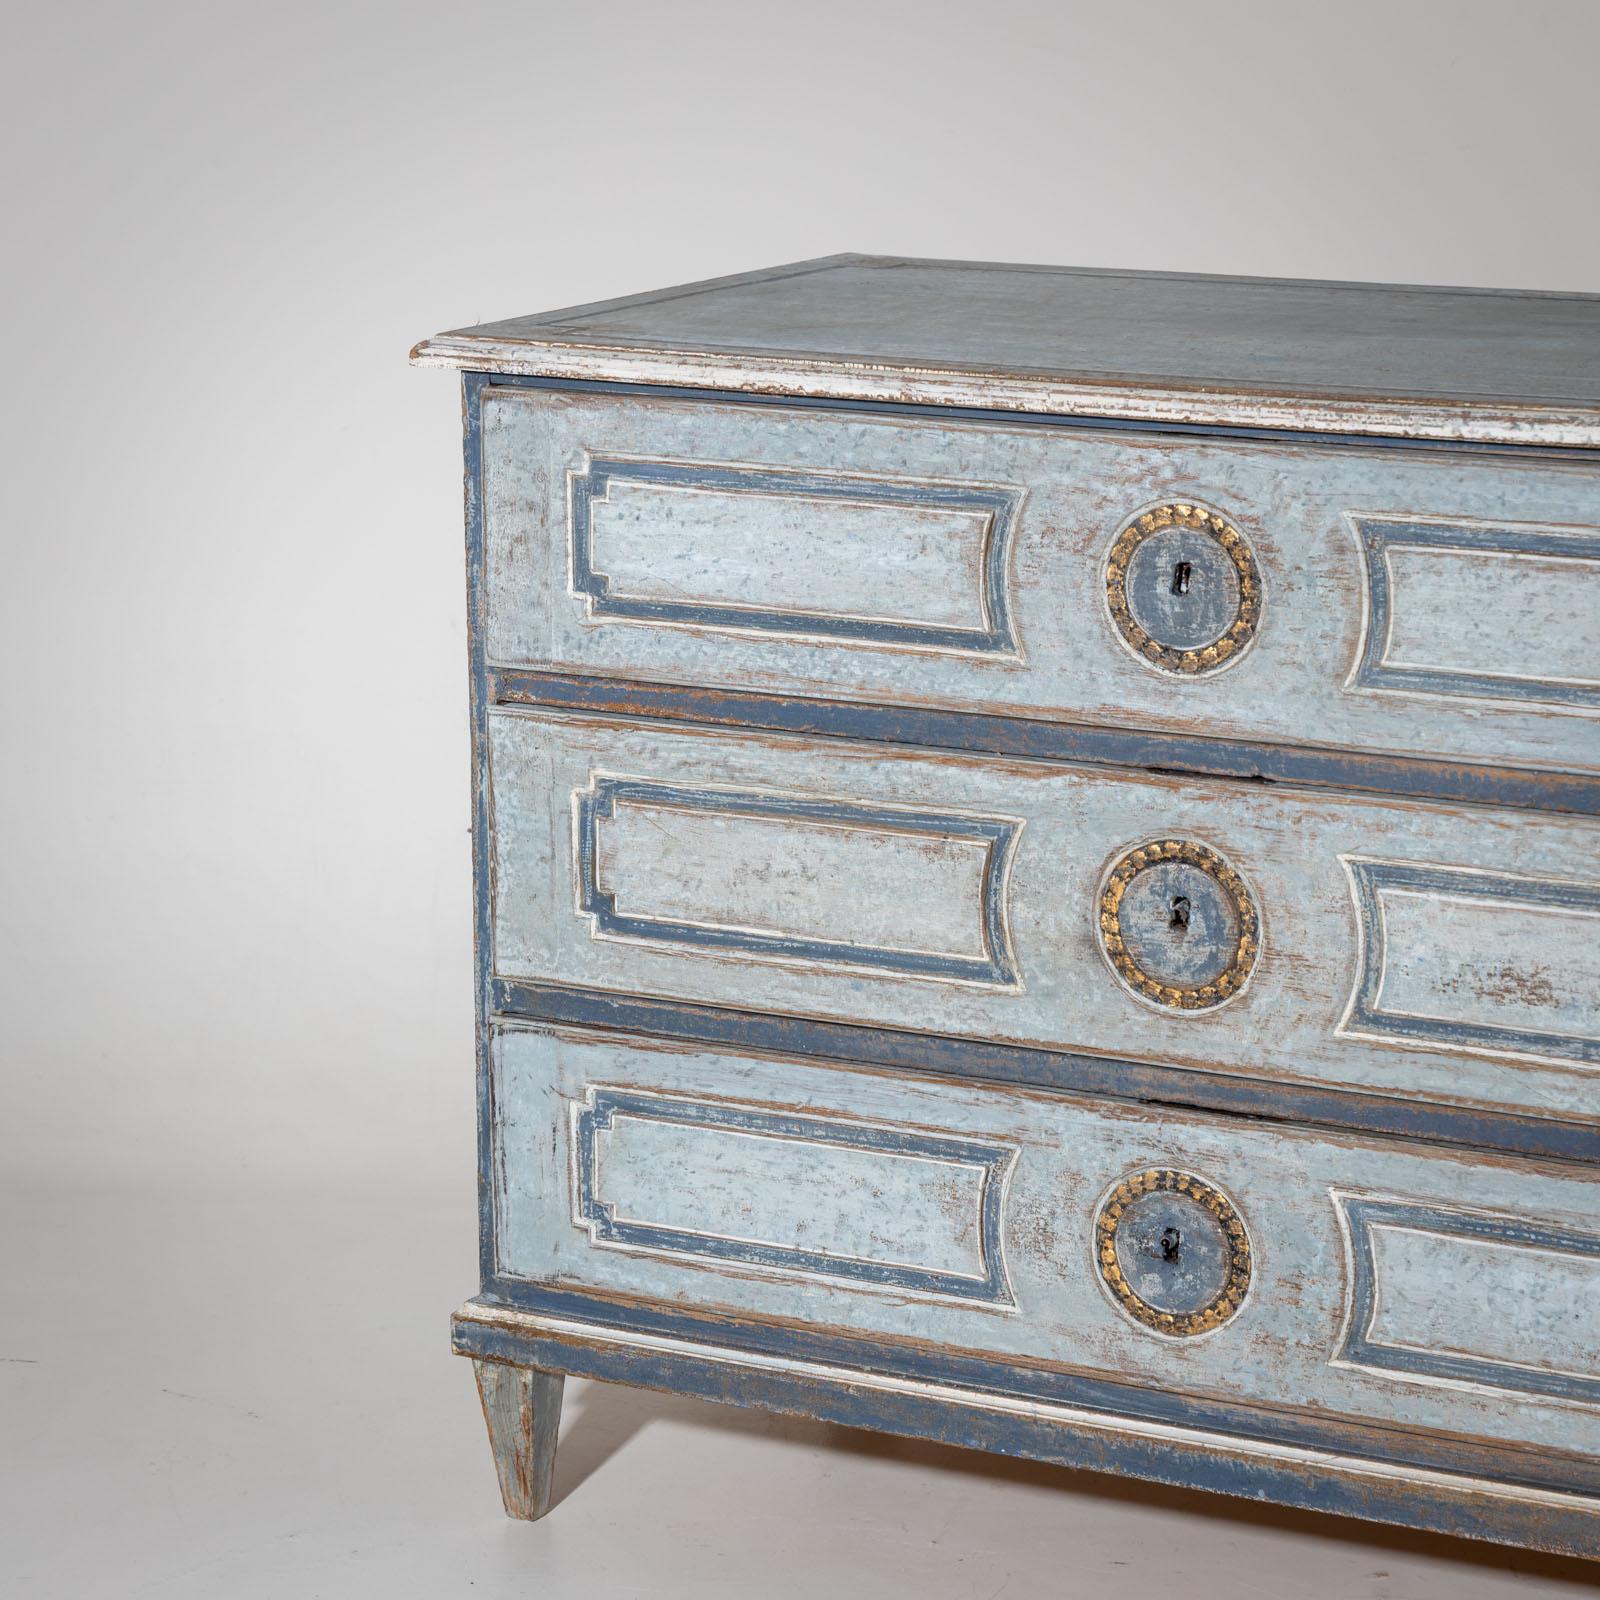 Hand-painted, blue chest of drawers with three drawers. Panels adorn the front and sides. The keyholes are set off with a gold-patinated ring. The chest of drawers has been repainted and given an antique patina.